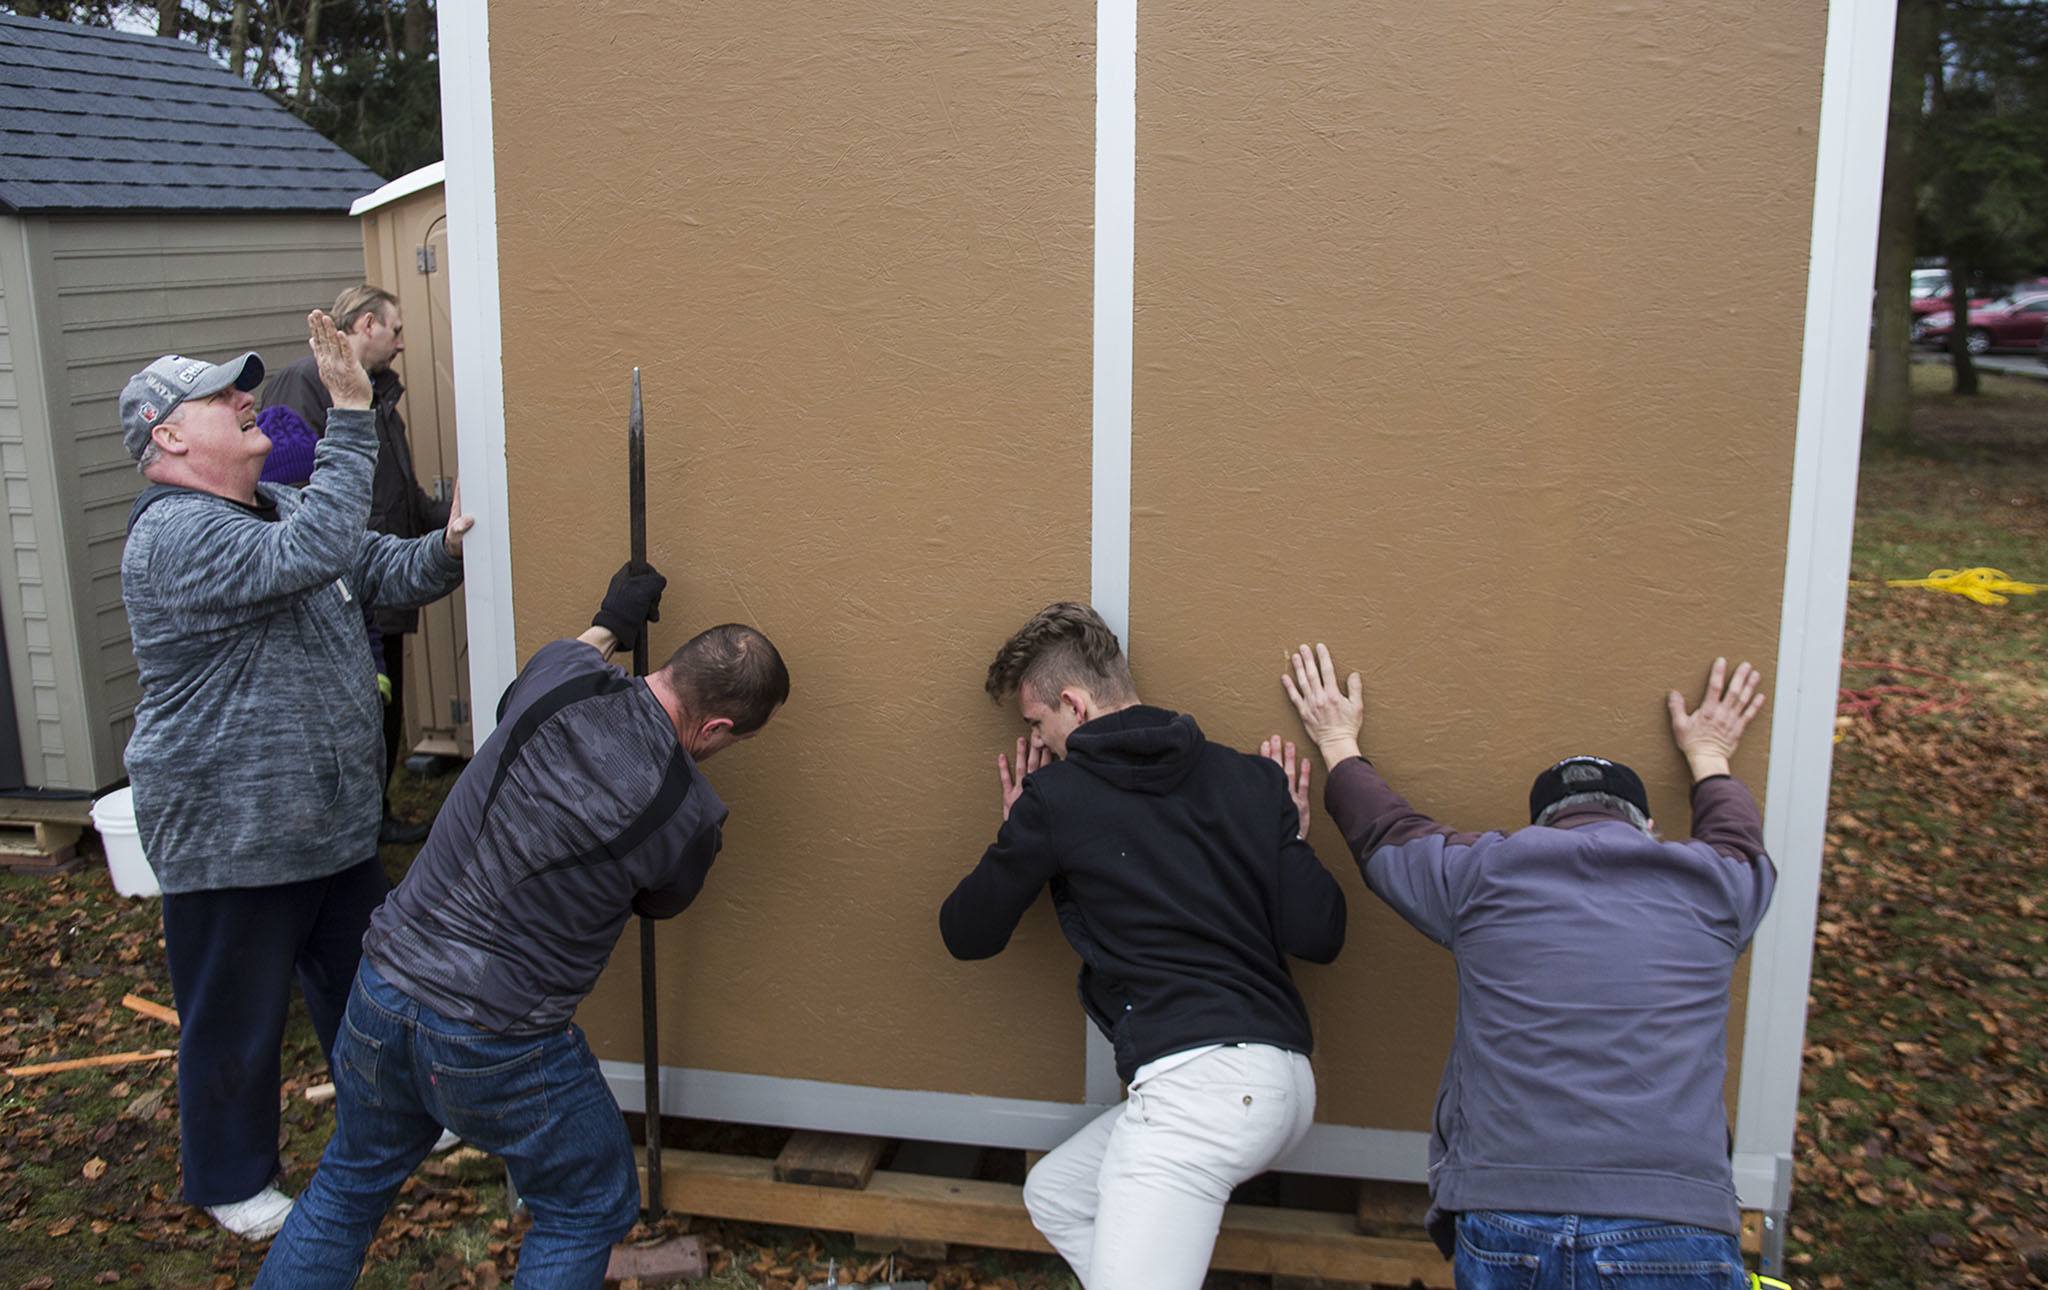 Darrel Potter (left) guides Gary Michaels, David Musiyenko and Tony Thompson as they push the community living room into place at the new tent village for homeless students at Good Shepherd Baptist Church on Jan. 17, in Lynnwood. Michaels attends Edmonds Community College and is the first resident to live on the site. (Daniella Beccaria / The Herald)